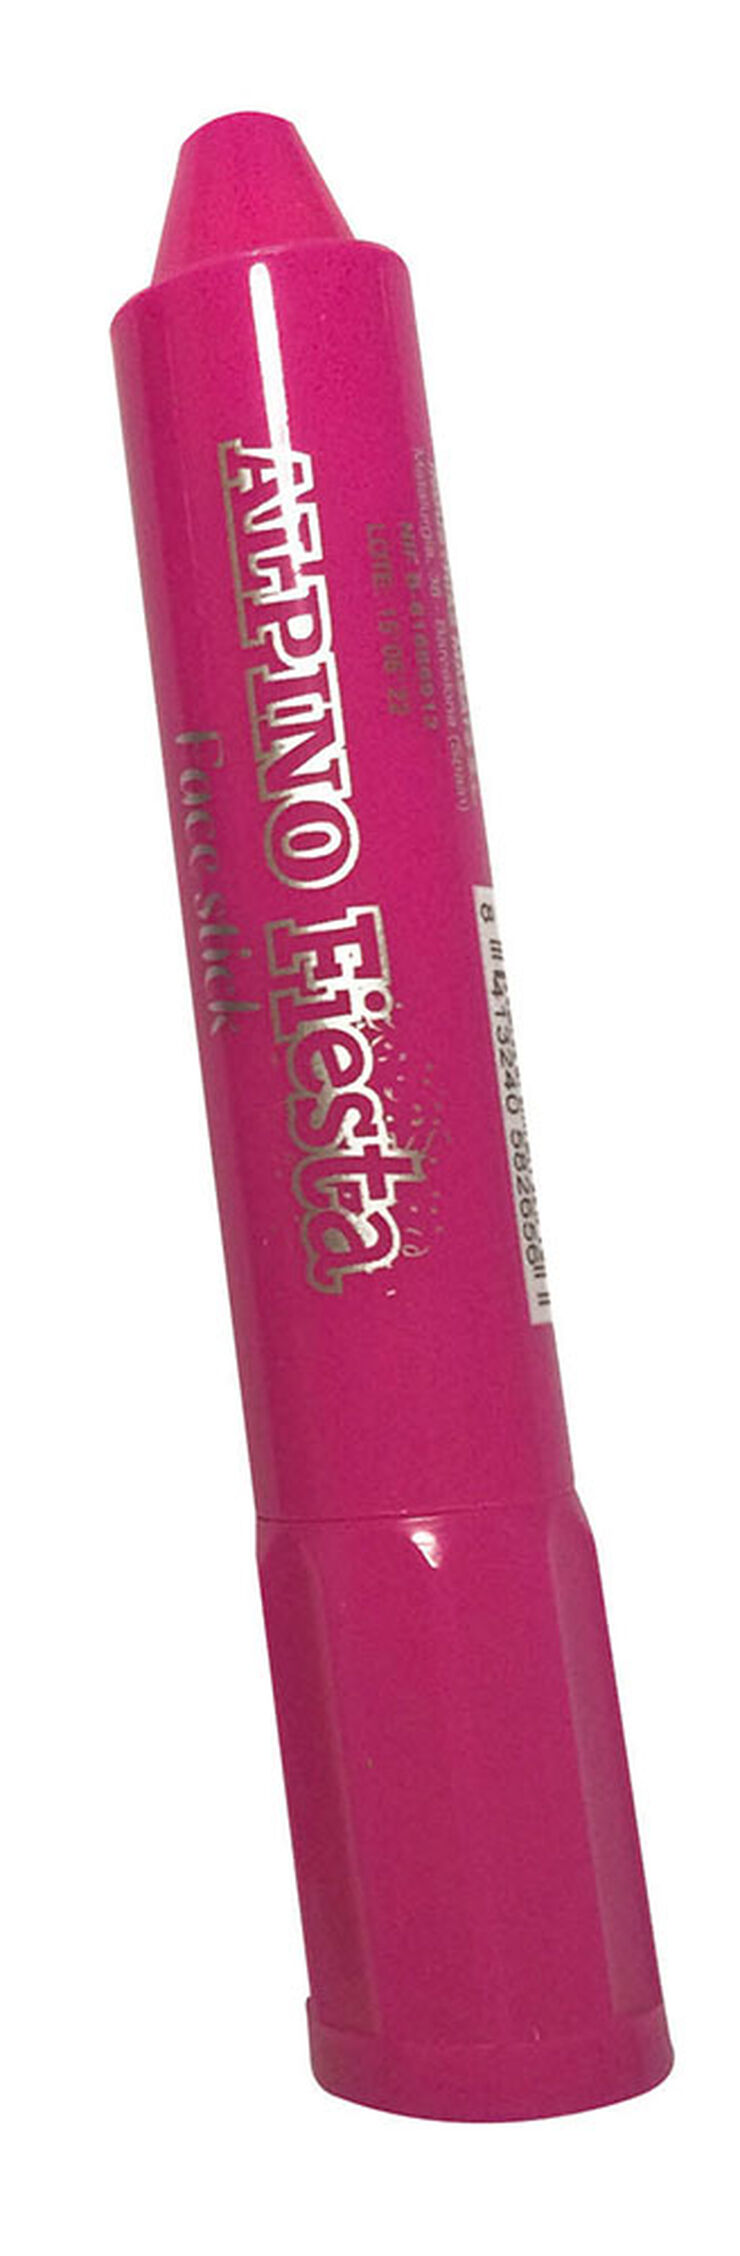 Maquillaje Face Stick Rosa